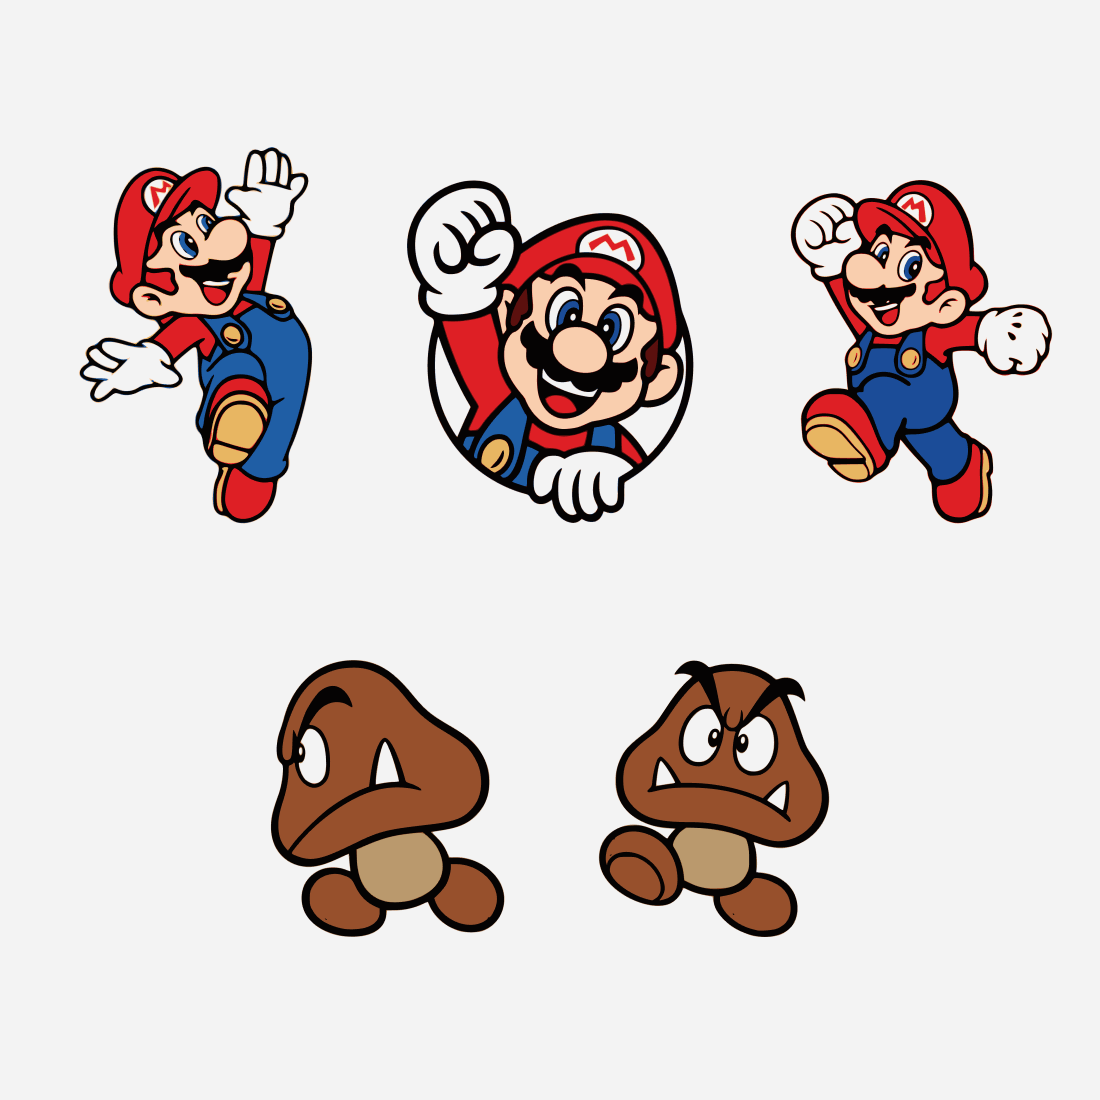 Super funny Mario and brown worms.